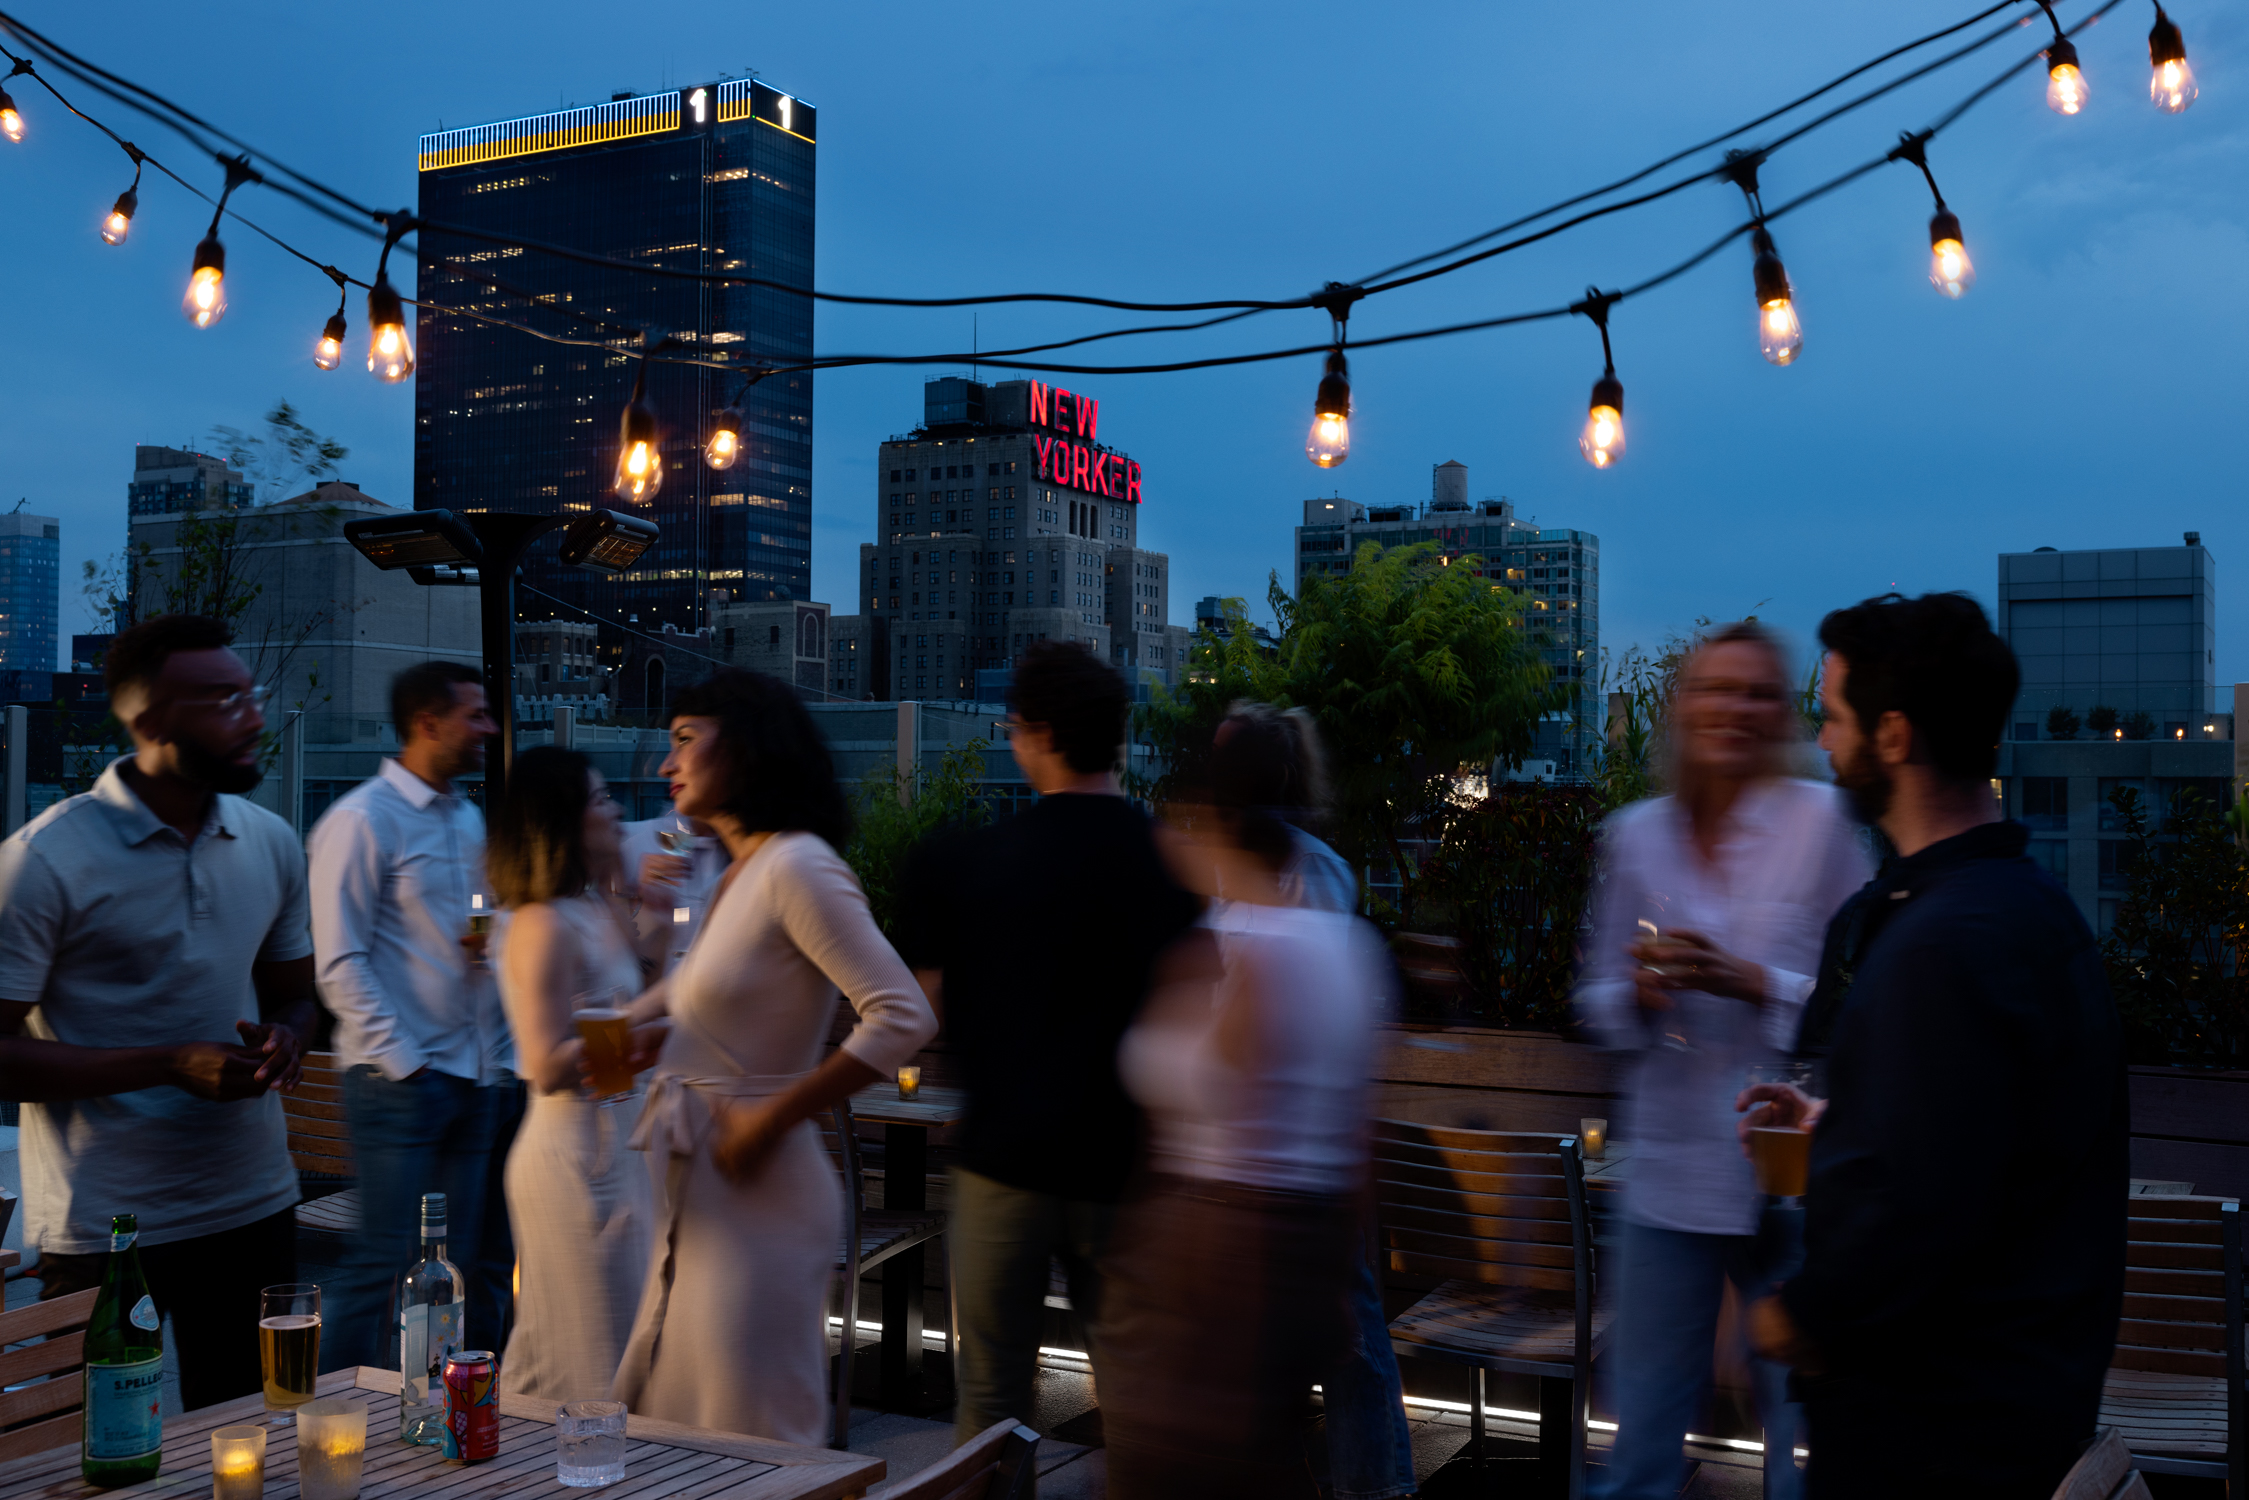 A group of people socializing on a rooftop at dusk with string lights overhead and city buildings, including one with a "New Yorker" sign, in the background.